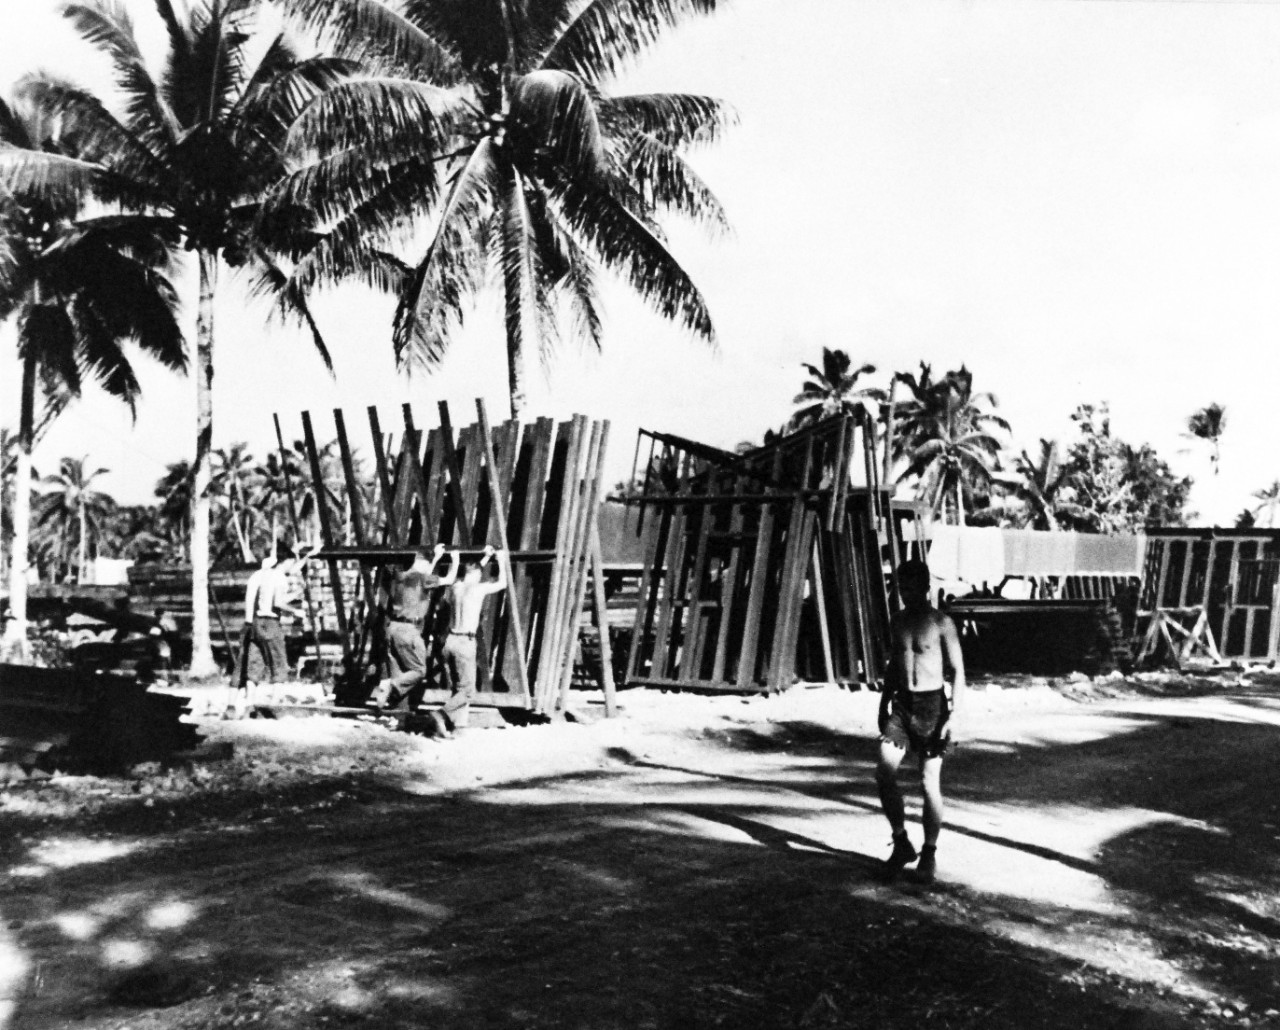 80-G-49583:  Okinawa Campaign, April-June 1945.  Part of assembly line on Okinawa where prefabricated roof and wall sections are bolted before hauling to building sites during construction operations.   Photograph received June 29, 1945.   Official U.S. Navy photograph, now in the collections of the National Archives.  (2017/01/10).